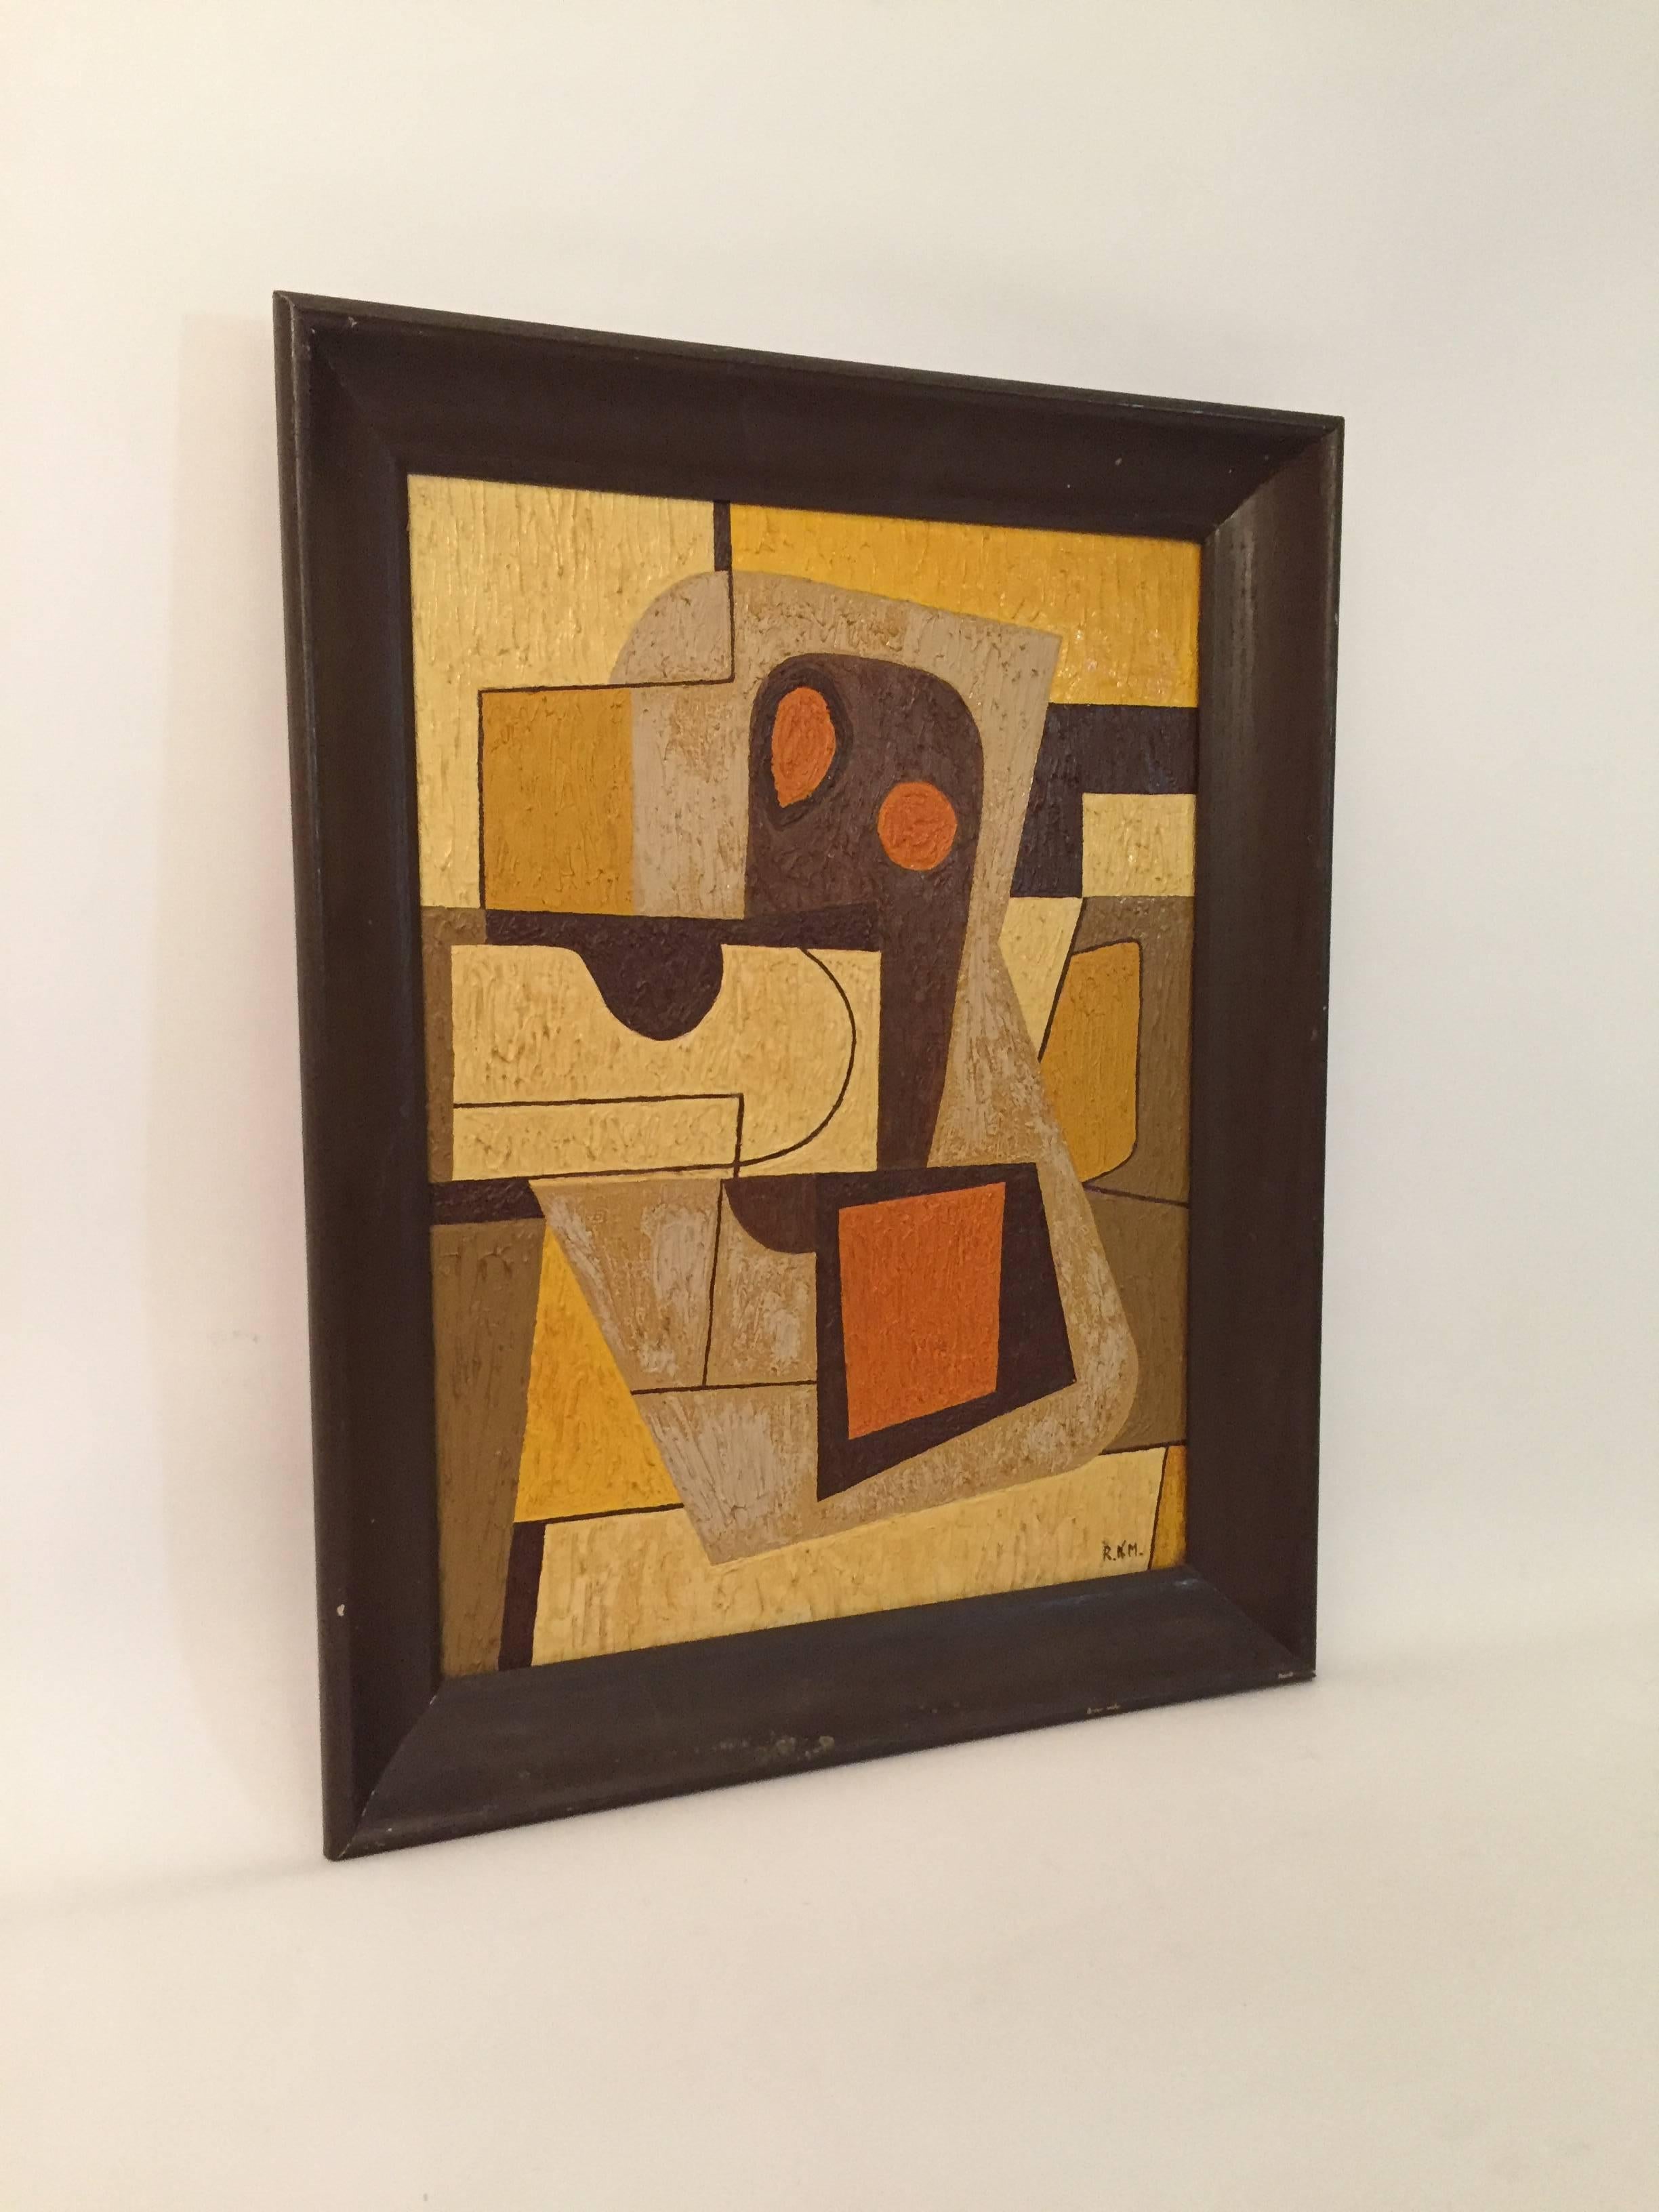 One of several pieces offered by the artist who signed their work, RKM. Purchased from a beautiful modern home in Briarcliff Manor, NY. The painstaking paint build up and careful hard edge rendering denotes an accomplished trained hand. The medium